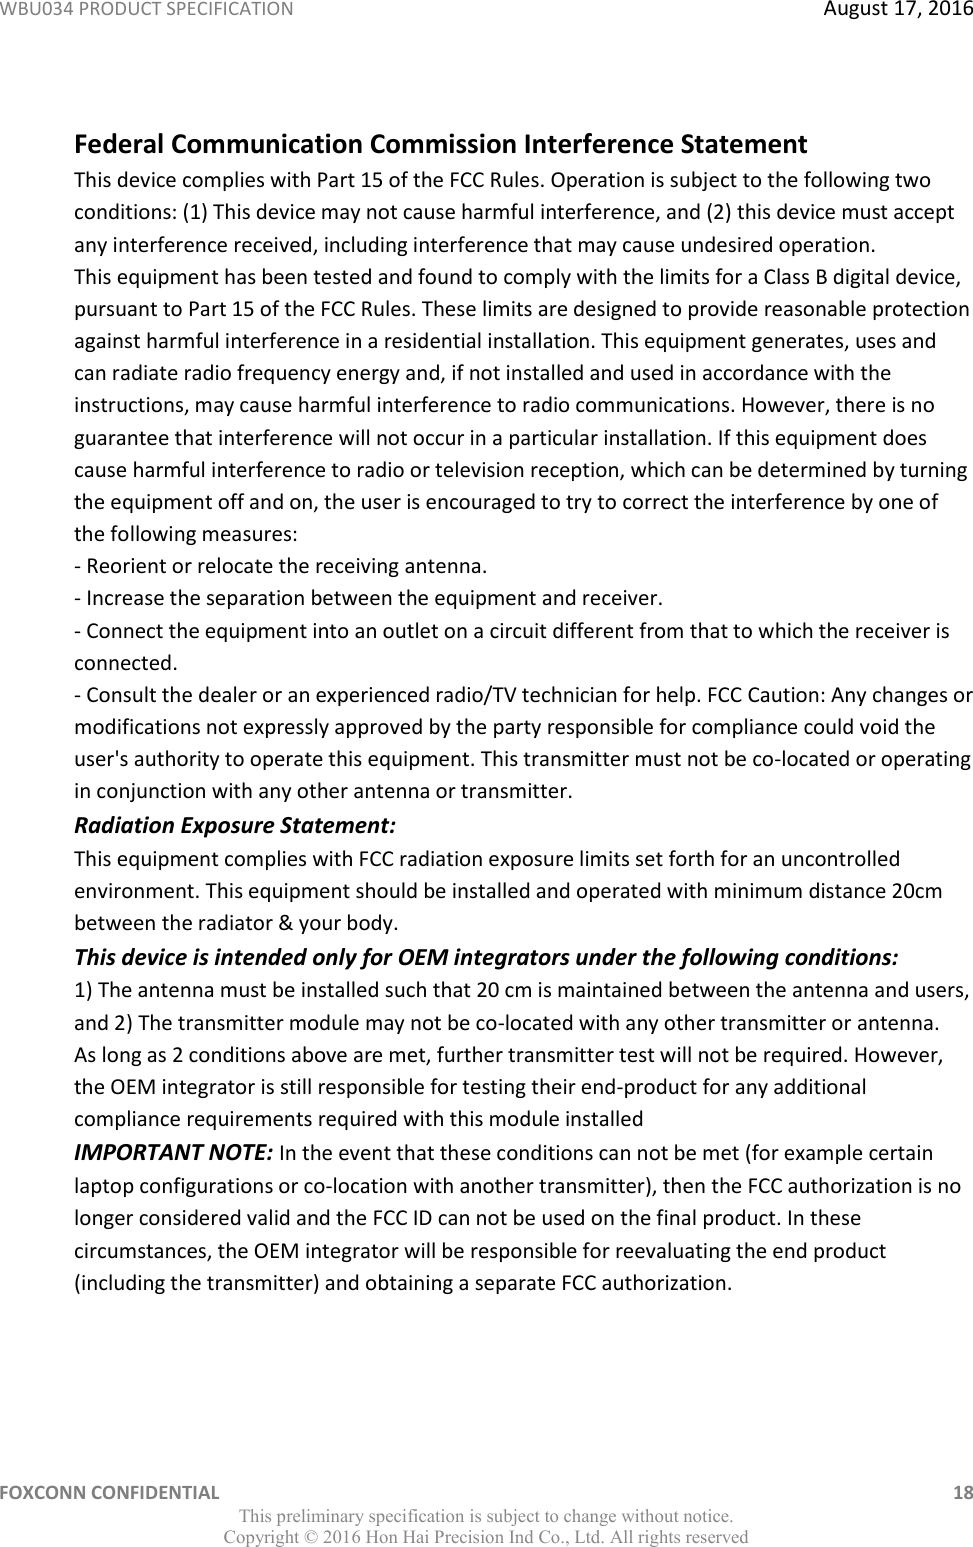 WBU034 PRODUCT SPECIFICATION  August 17, 2016 FOXCONN CONFIDENTIAL    18 This preliminary specification is subject to change without notice. Copyright ©  2016 Hon Hai Precision Ind Co., Ltd. All rights reserved  Federal Communication Commission Interference Statement  This device complies with Part 15 of the FCC Rules. Operation is subject to the following two conditions: (1) This device may not cause harmful interference, and (2) this device must accept any interference received, including interference that may cause undesired operation.  This equipment has been tested and found to comply with the limits for a Class B digital device, pursuant to Part 15 of the FCC Rules. These limits are designed to provide reasonable protection against harmful interference in a residential installation. This equipment generates, uses and can radiate radio frequency energy and, if not installed and used in accordance with the instructions, may cause harmful interference to radio communications. However, there is no guarantee that interference will not occur in a particular installation. If this equipment does cause harmful interference to radio or television reception, which can be determined by turning the equipment off and on, the user is encouraged to try to correct the interference by one of the following measures:  - Reorient or relocate the receiving antenna.  - Increase the separation between the equipment and receiver.  - Connect the equipment into an outlet on a circuit different from that to which the receiver is connected.  - Consult the dealer or an experienced radio/TV technician for help. FCC Caution: Any changes or modifications not expressly approved by the party responsible for compliance could void the user&apos;s authority to operate this equipment. This transmitter must not be co-located or operating in conjunction with any other antenna or transmitter.  Radiation Exposure Statement:  This equipment complies with FCC radiation exposure limits set forth for an uncontrolled environment. This equipment should be installed and operated with minimum distance 20cm between the radiator &amp; your body. This device is intended only for OEM integrators under the following conditions:  1) The antenna must be installed such that 20 cm is maintained between the antenna and users, and 2) The transmitter module may not be co-located with any other transmitter or antenna.  As long as 2 conditions above are met, further transmitter test will not be required. However, the OEM integrator is still responsible for testing their end-product for any additional compliance requirements required with this module installed IMPORTANT NOTE: In the event that these conditions can not be met (for example certain laptop configurations or co-location with another transmitter), then the FCC authorization is no longer considered valid and the FCC ID can not be used on the final product. In these circumstances, the OEM integrator will be responsible for reevaluating the end product (including the transmitter) and obtaining a separate FCC authorization. 